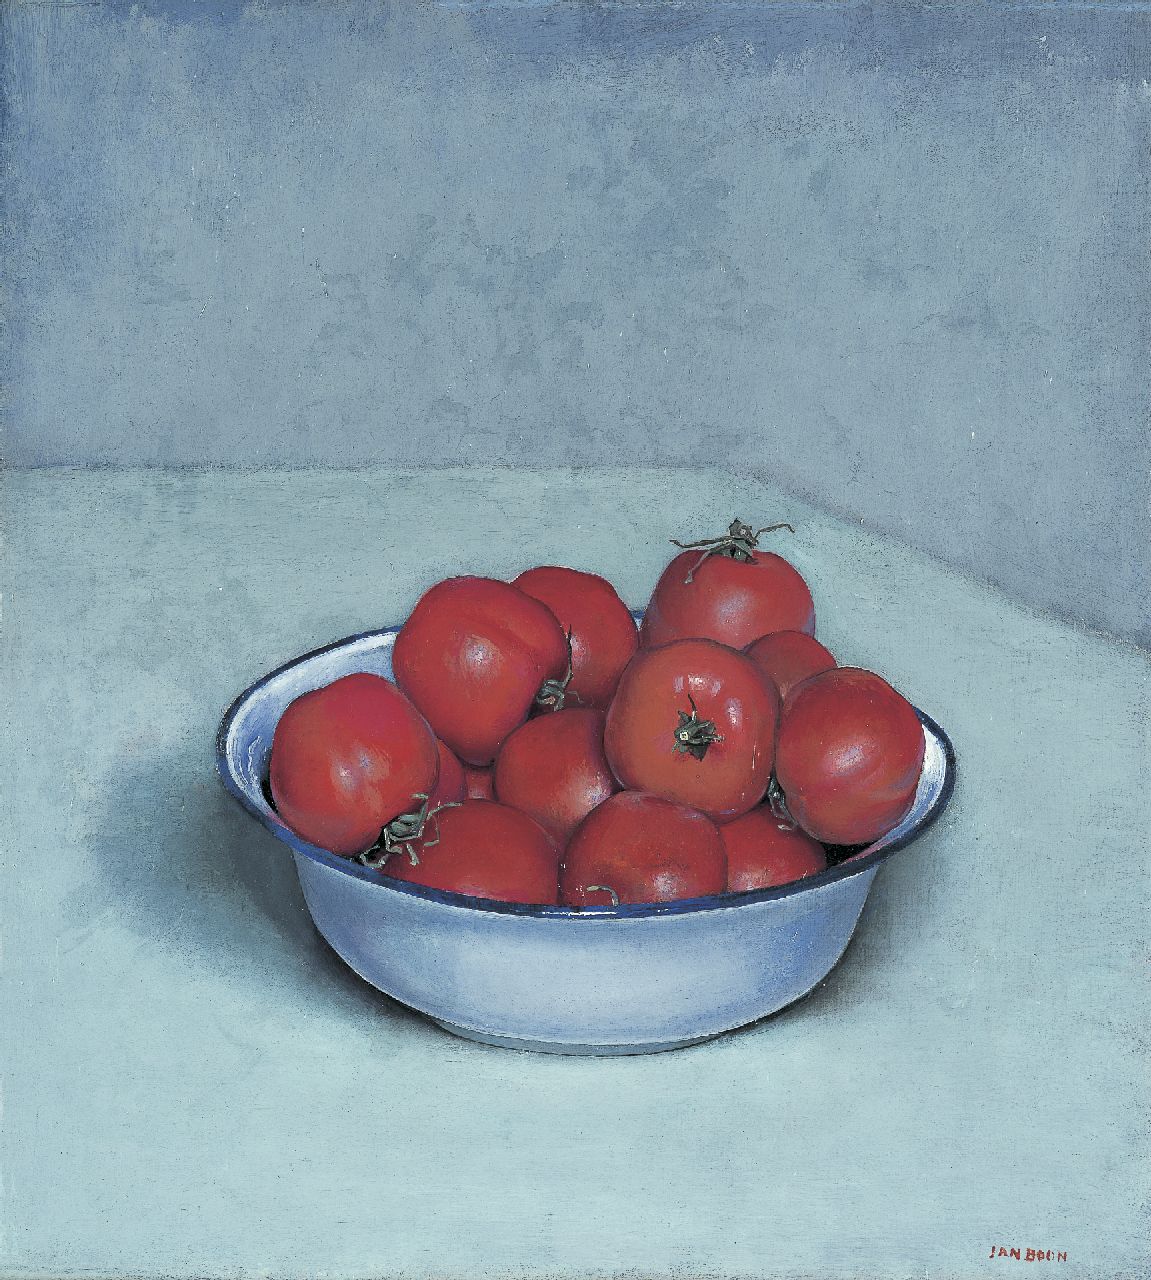 Boon J.  | Jan Boon, Tomatoes in a enamel bowl, oil on canvas 41.1 x 37.3 cm, signed l.r.